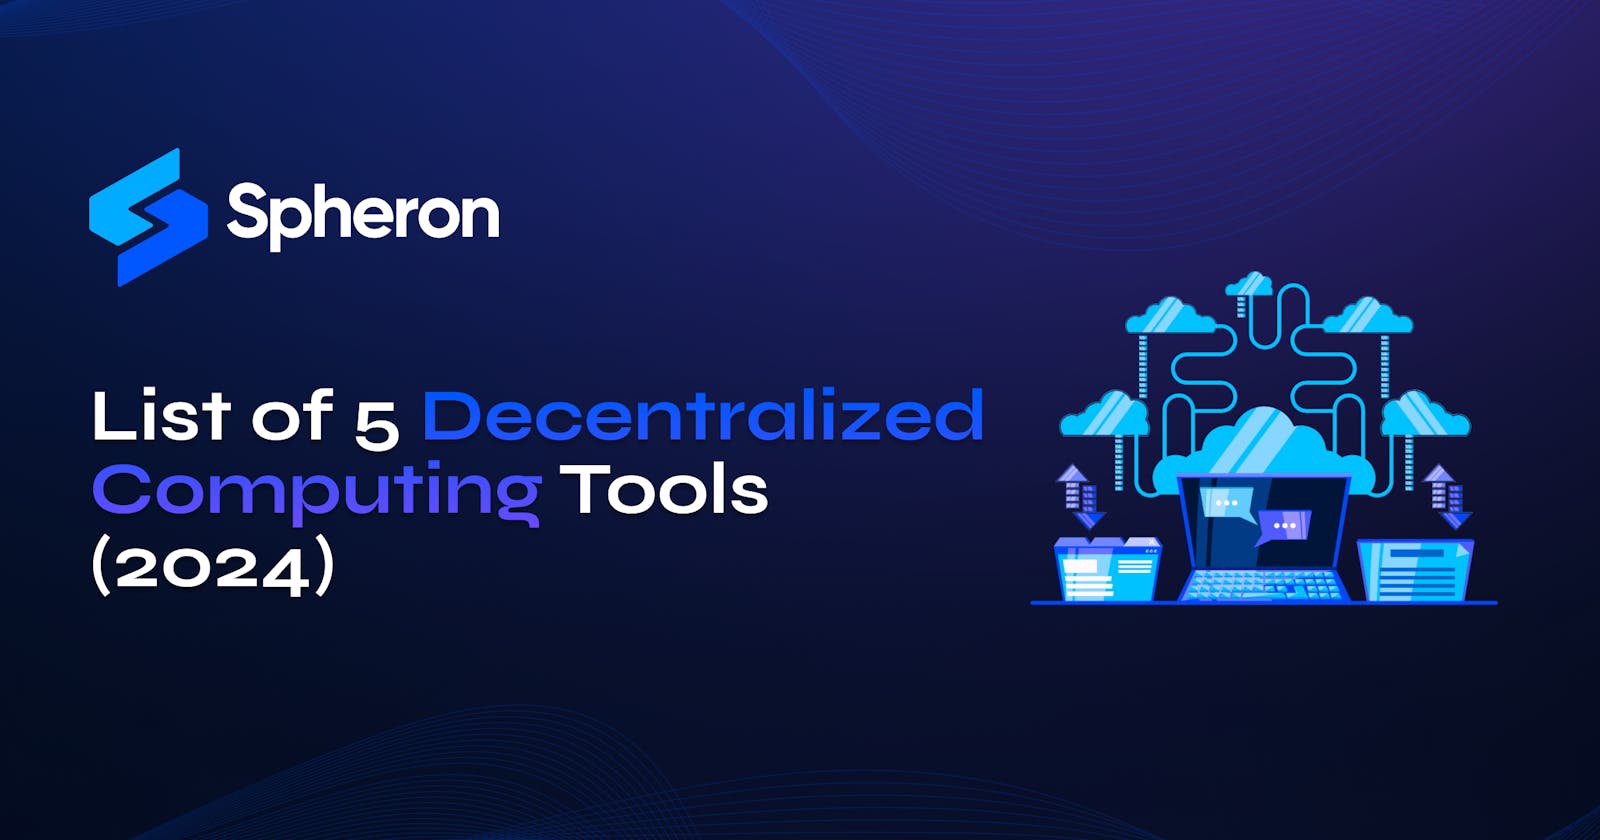 List of 5 Decentralized Computing Tools (2024)